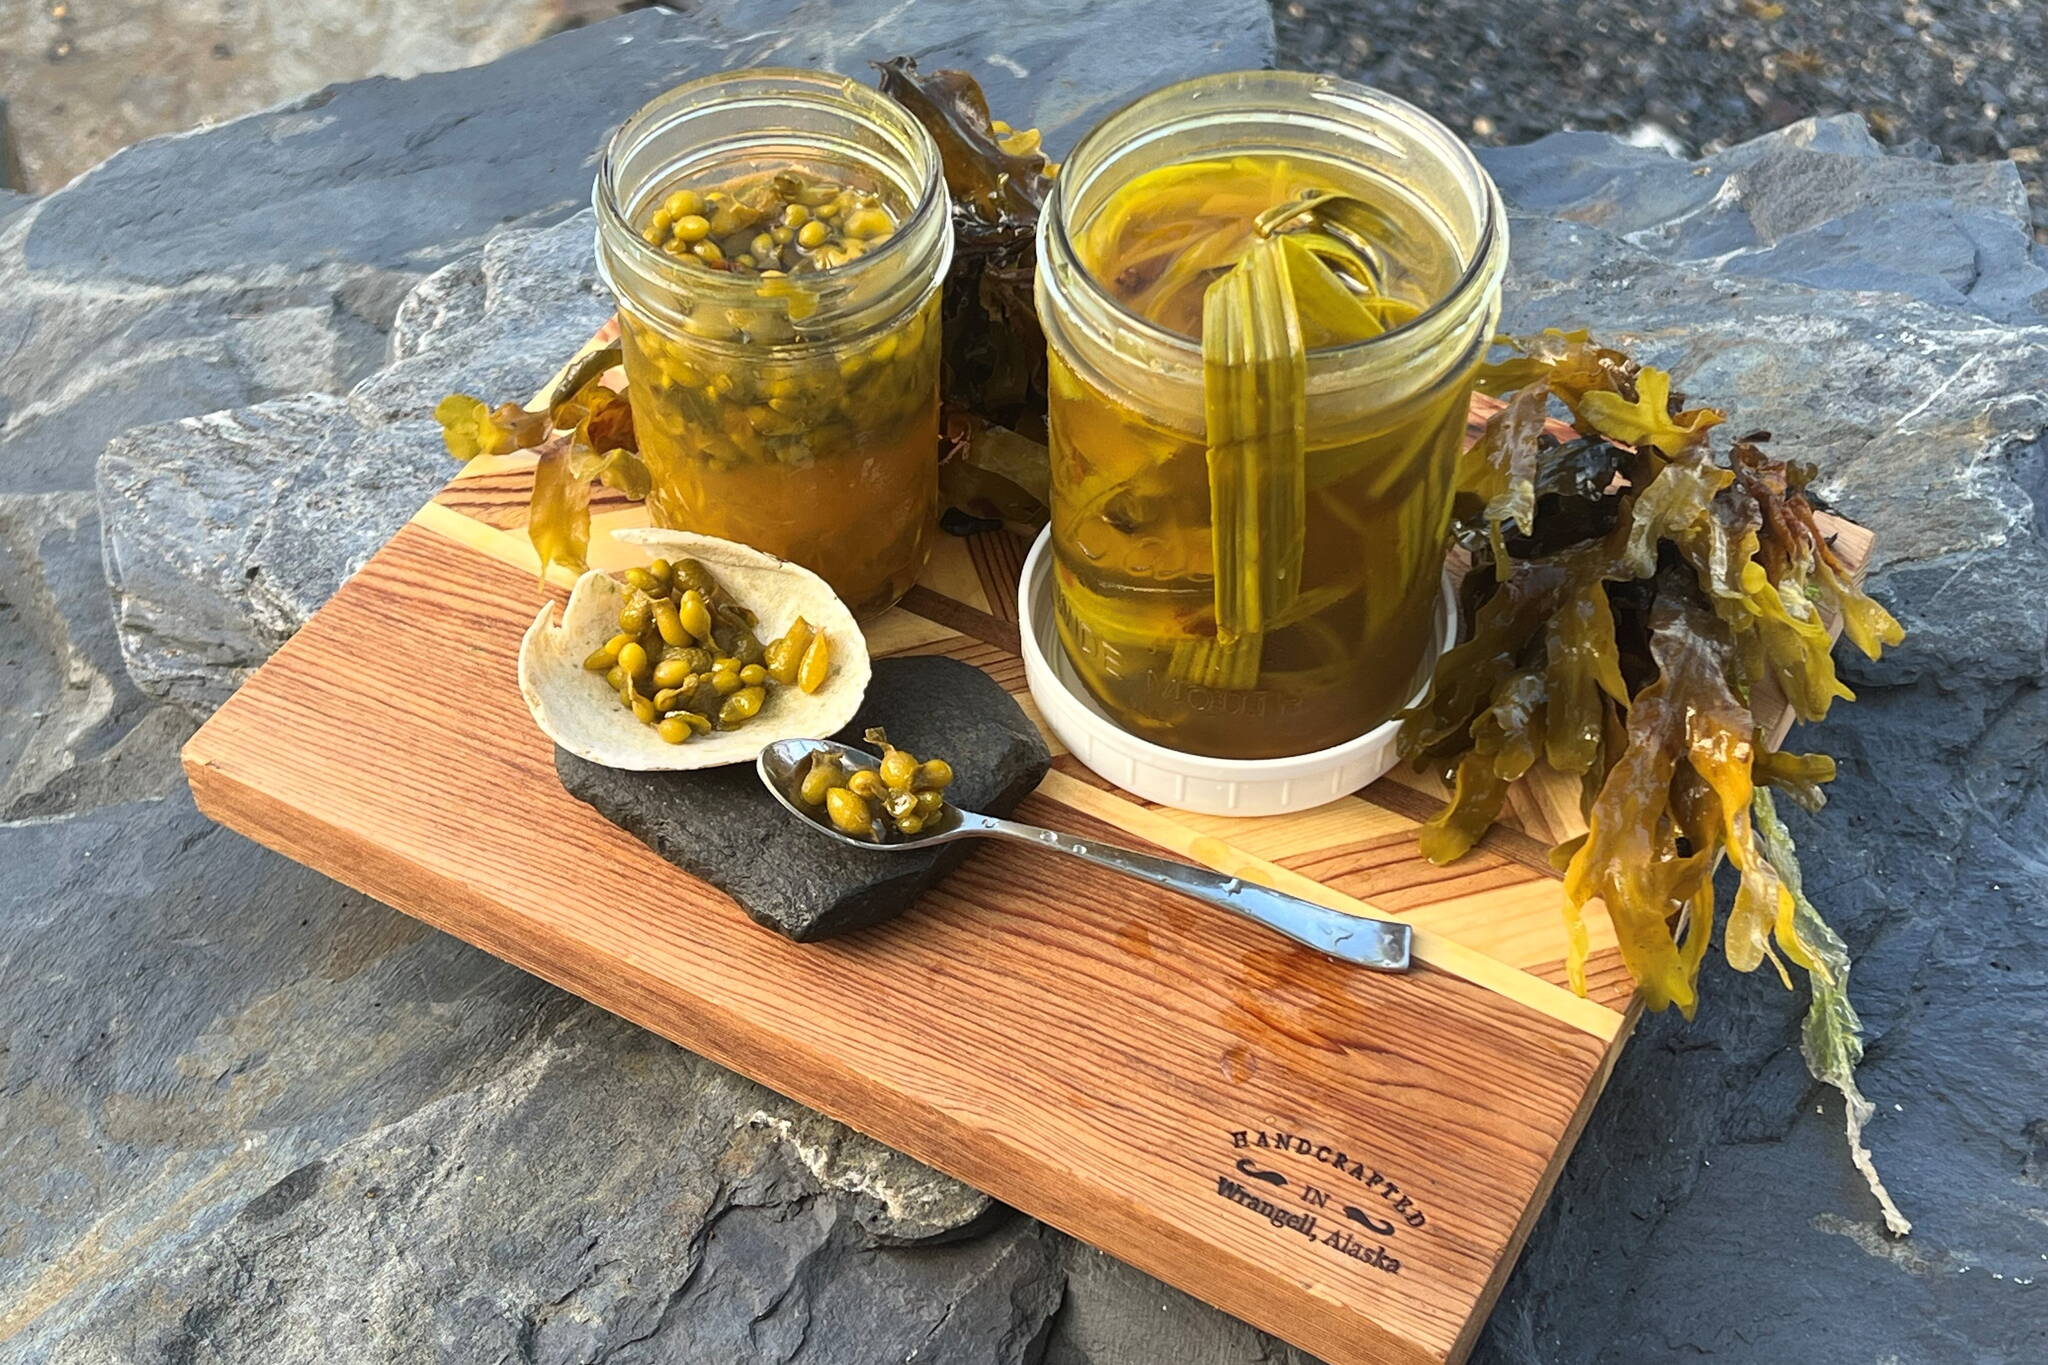 Pickled popweed and goose tongue ready for taste testing. (Photo by Vivian Faith Prescott)